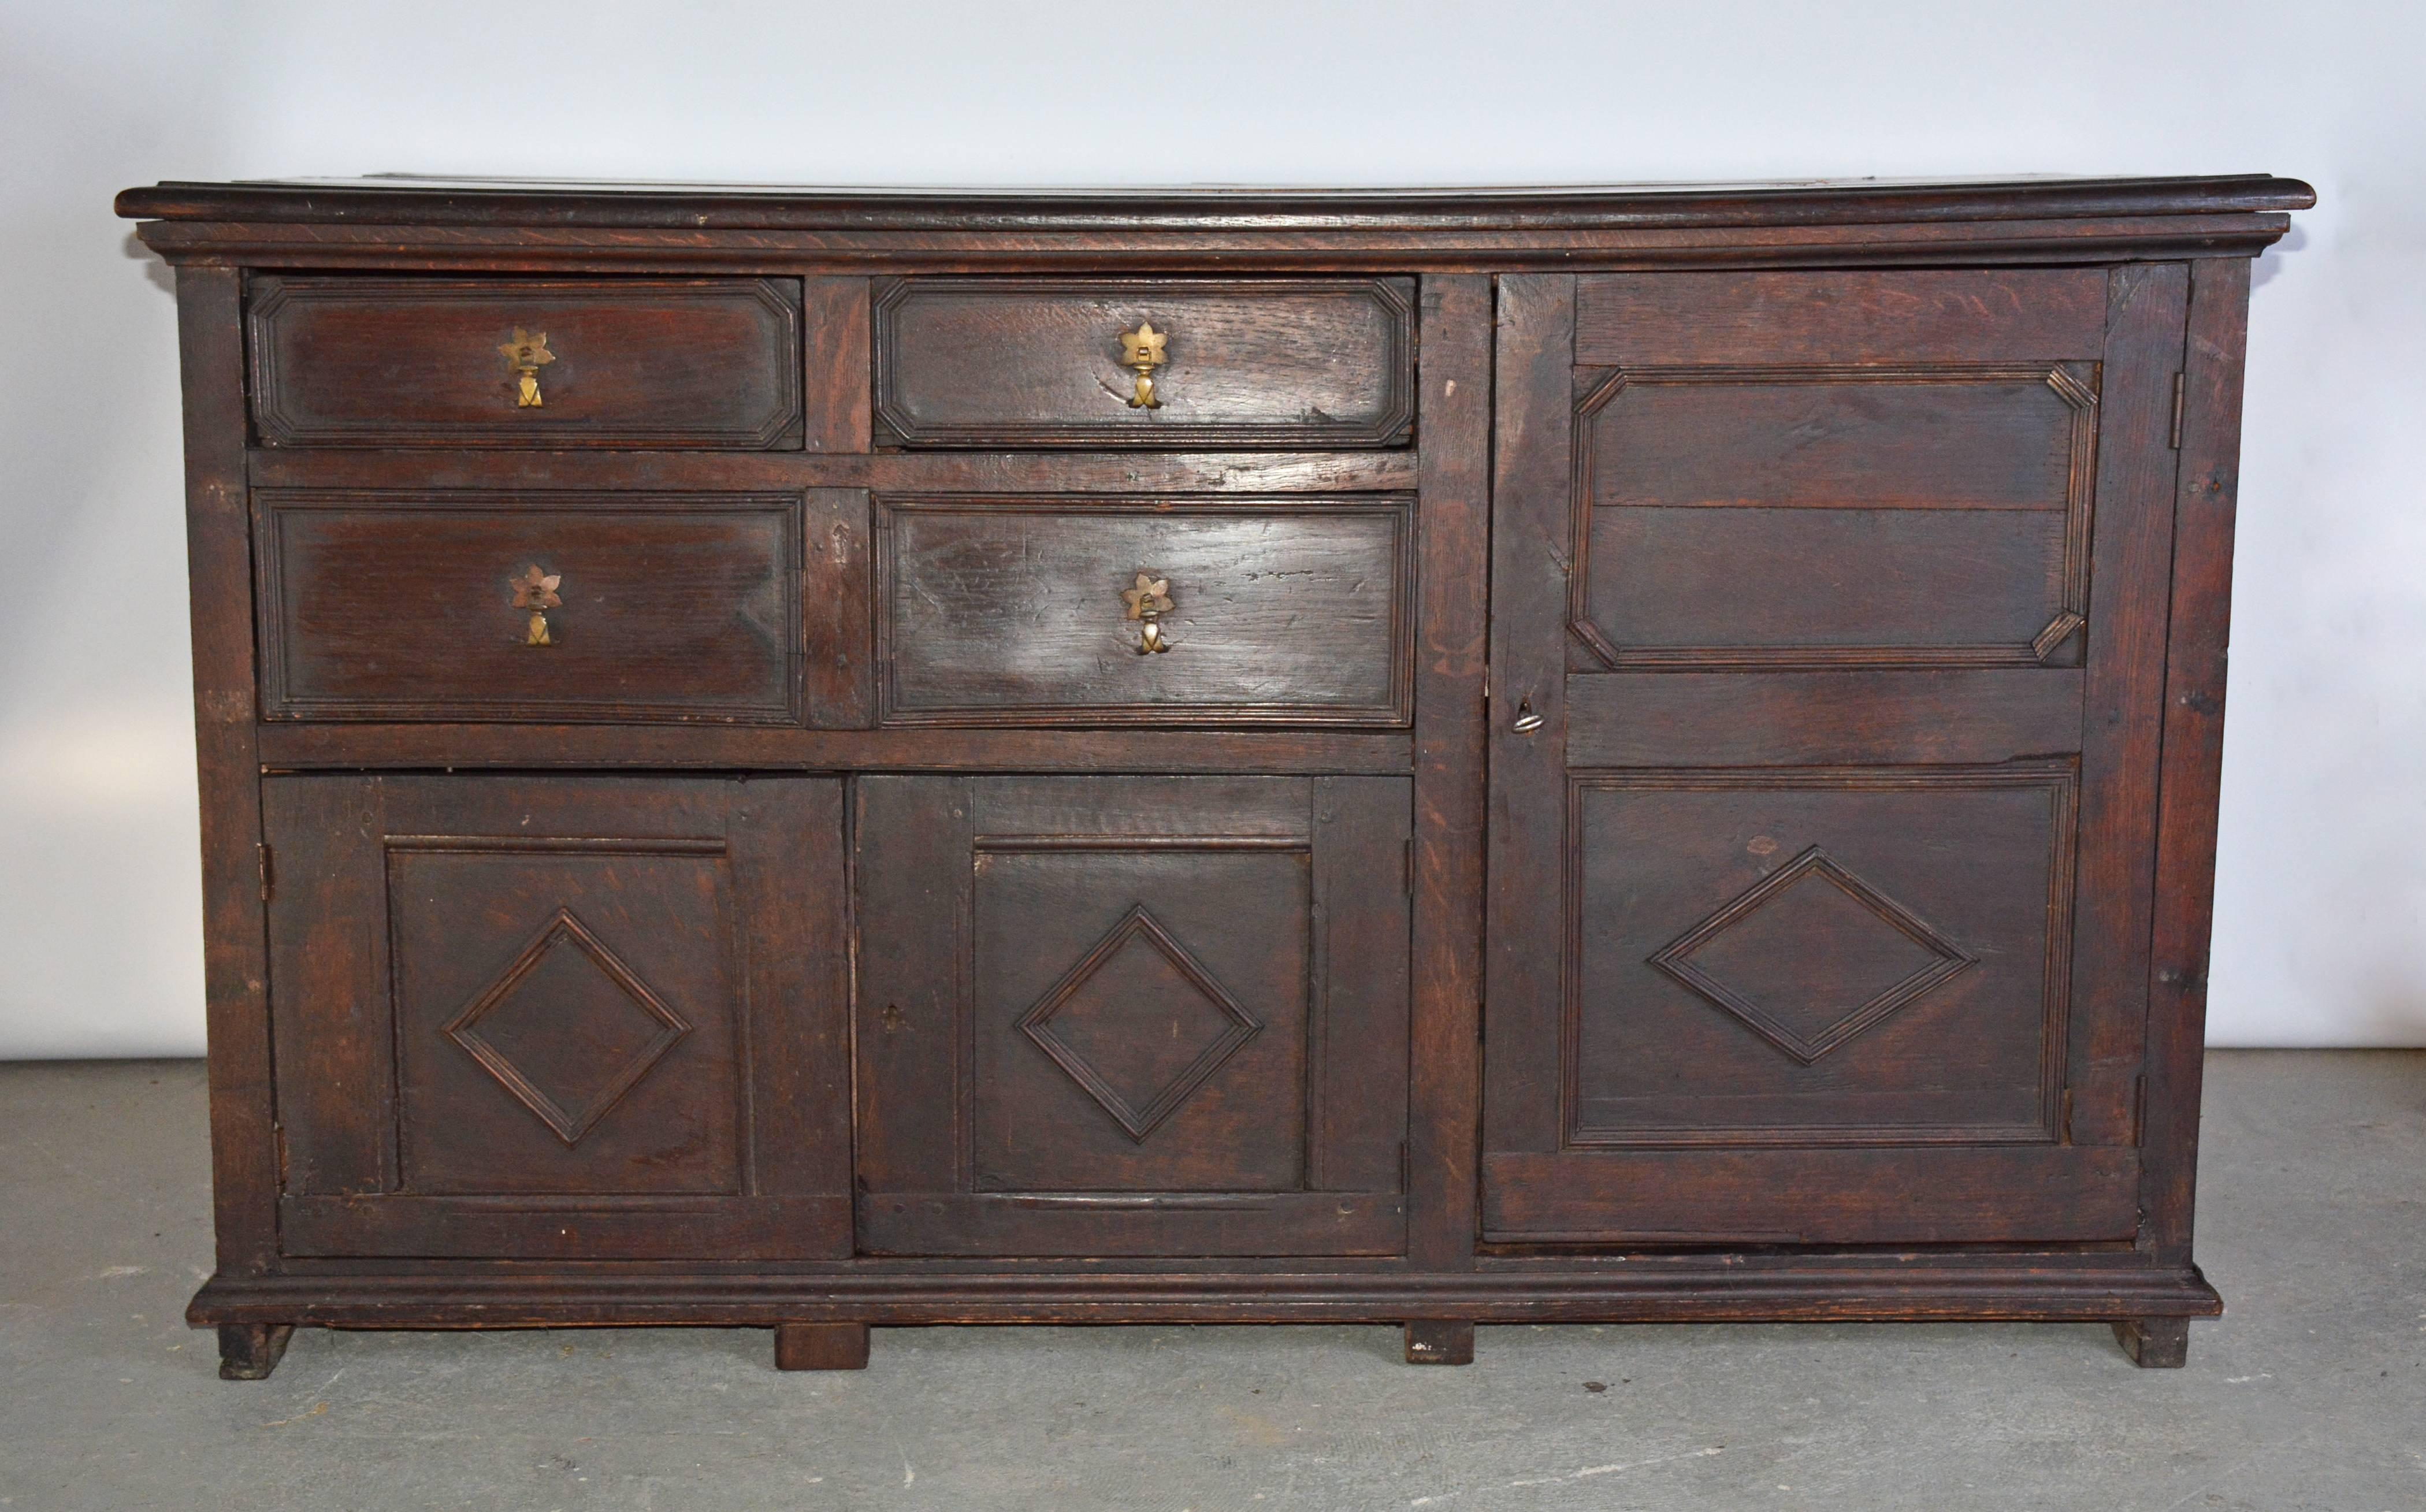 18th century William & Mary oak sideboard with four drawers, two smaller cabinet beneath and a larger on the side. The chest displays all the features associated with the era the geometric design on the drawer and cabinet fronts.
Search terms: 